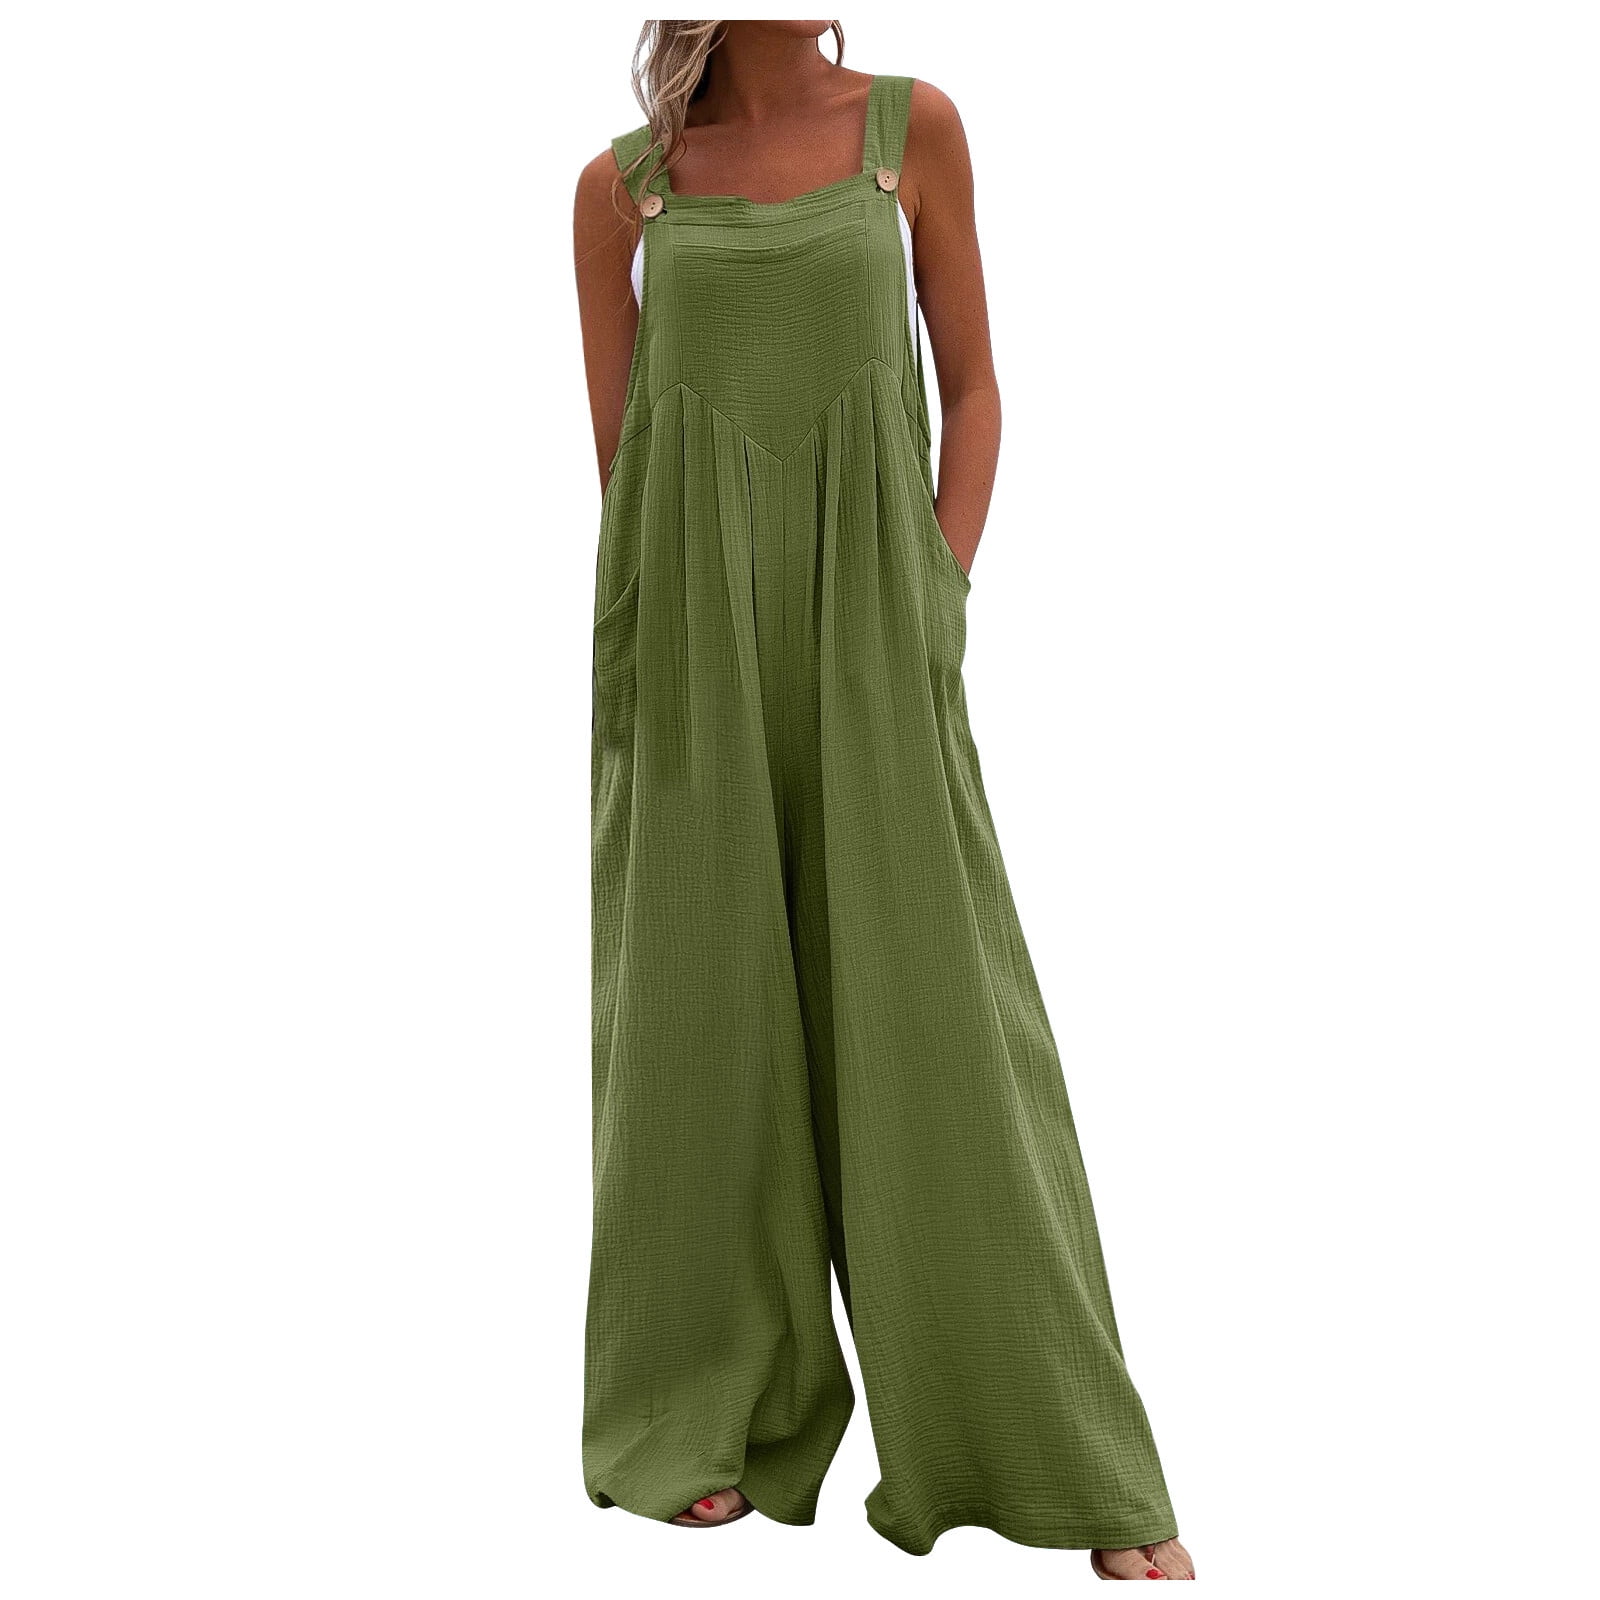 YDKZYMD Army Green Jumpsuits For Women With Zipper Pockets Straps Wide Leg  Tie Dye Bib Jumpsuit Pant Outfits Loose Fit with Pockets Romper Button 